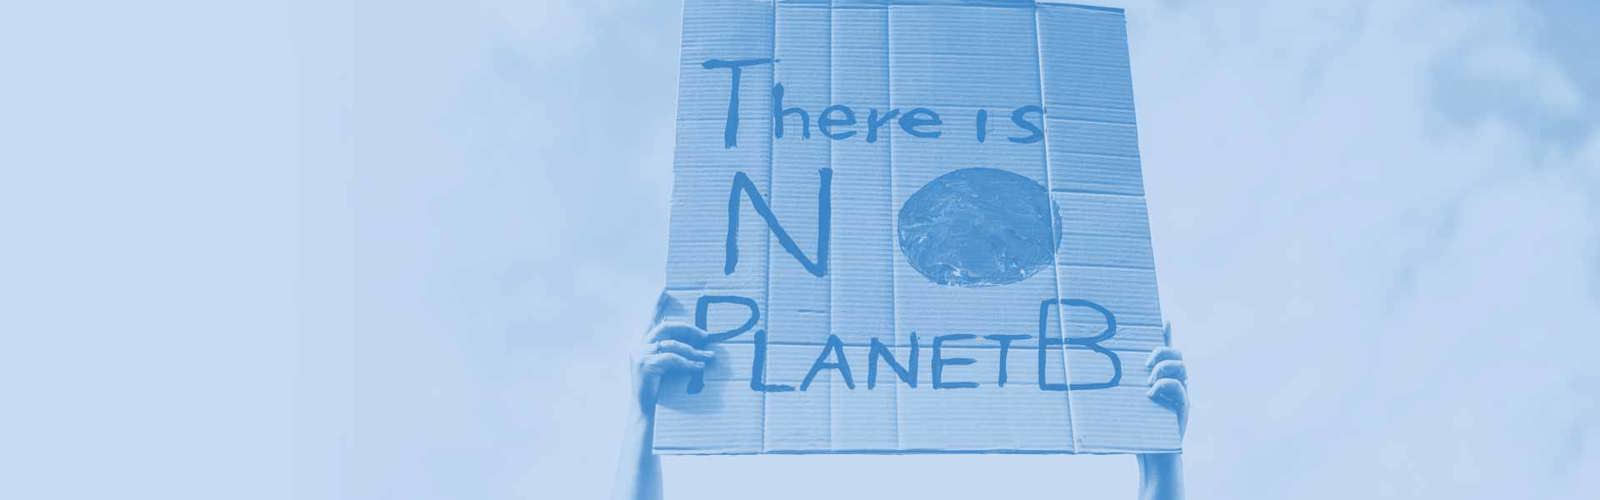 Image of a placard with the words 'There is no Planet B'